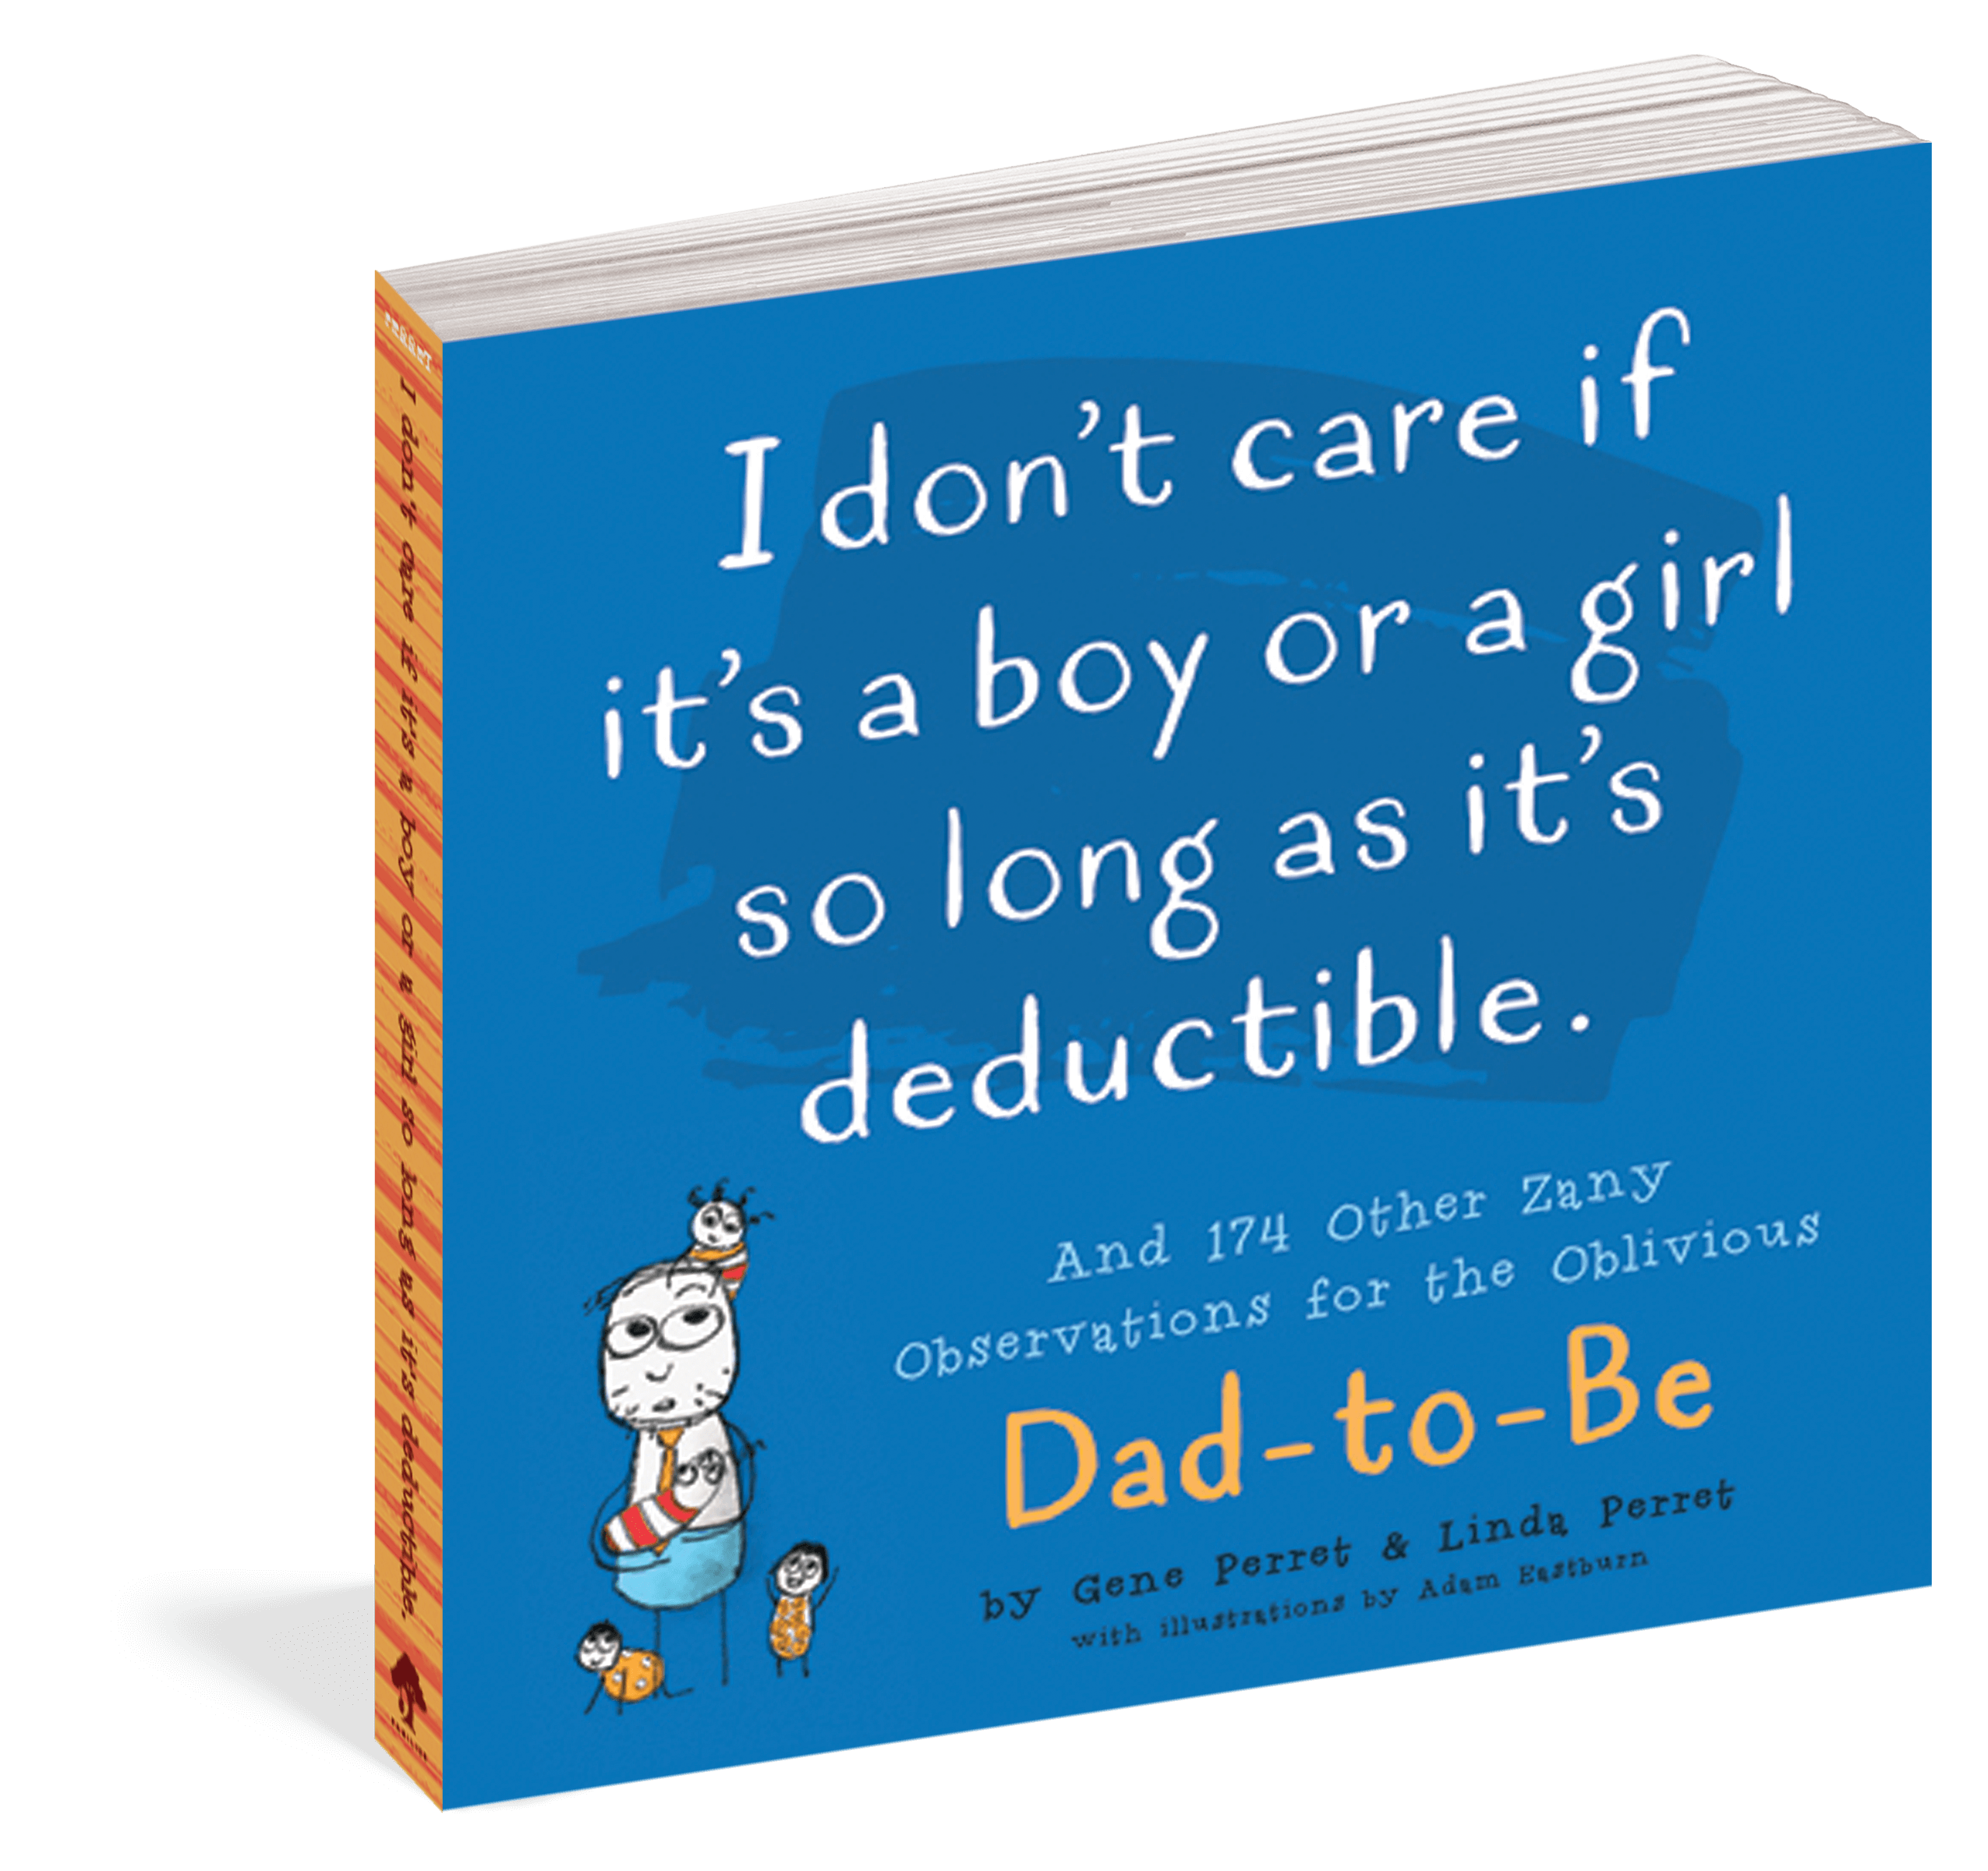 The cover of the book I Don't Care If It's A Boy Or A Girl So Long As It's Deductible.